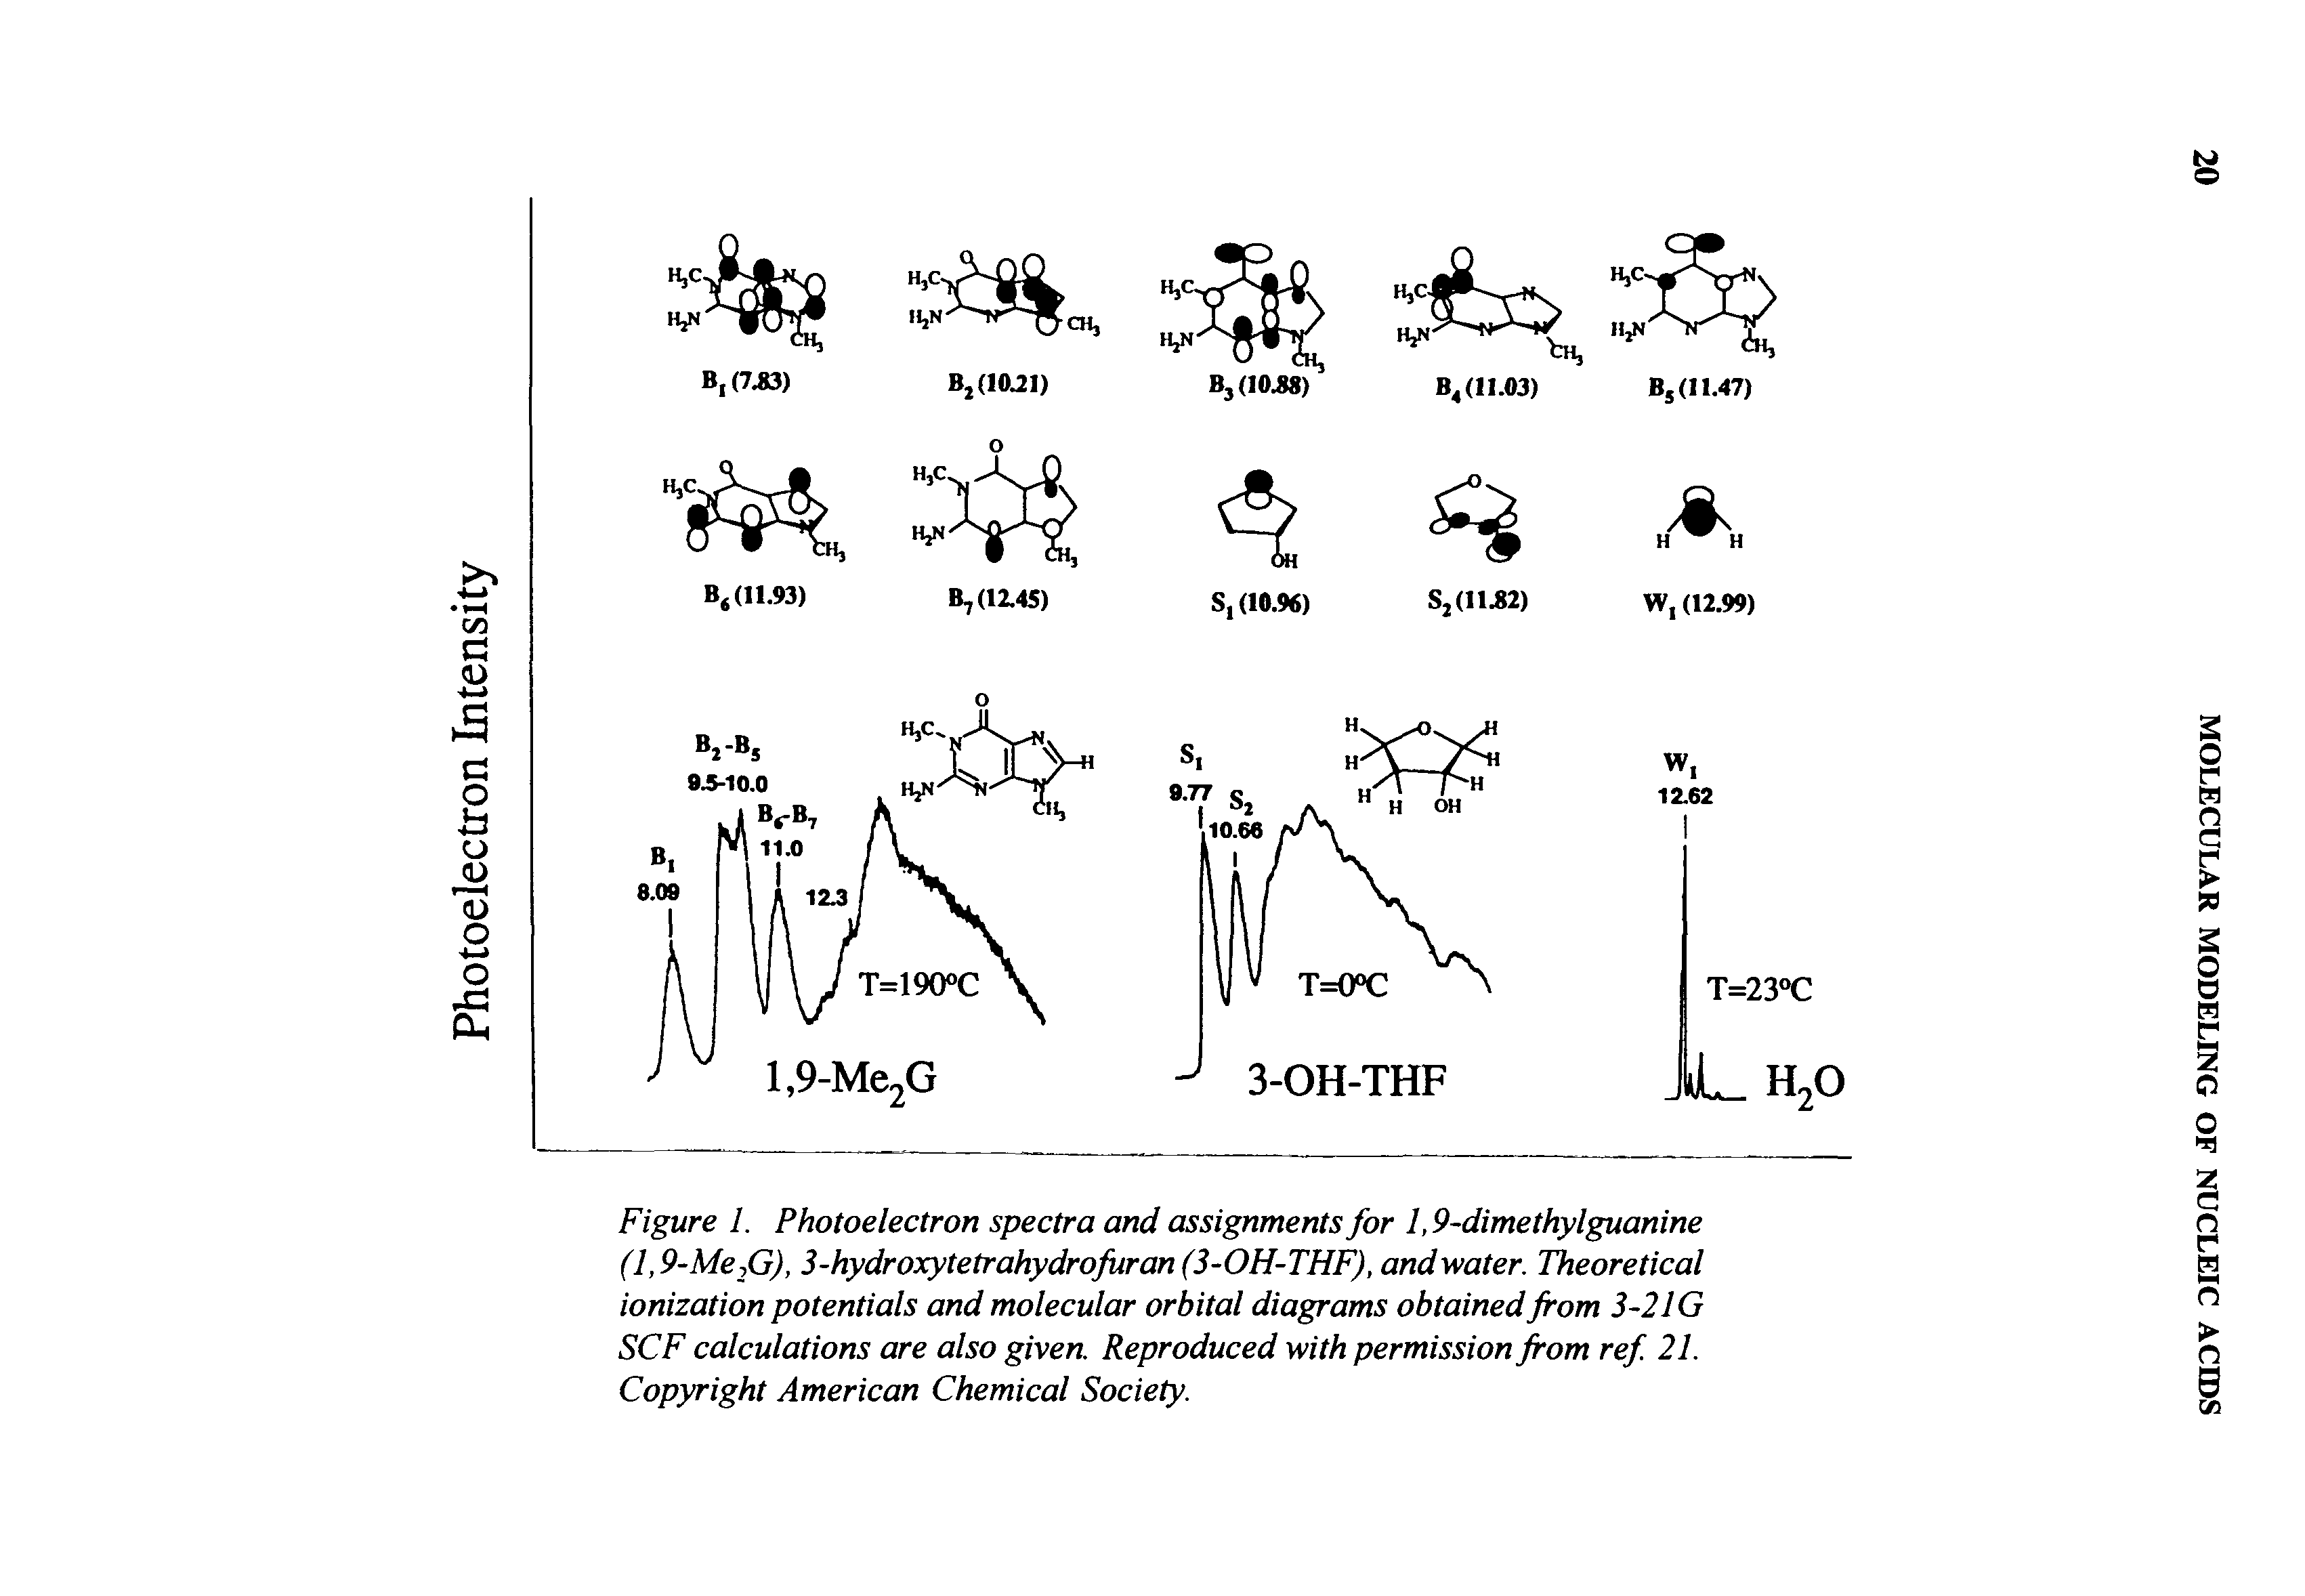 Figure 1. Photoelectron spectra and assignments for 1,9-dimethylguanine (1,9-Mefi), 3-hydroxytetrahydrofuran(3-OH-THF), and water. Theoretical ionization potentials and molecular orbital diagrams obtained from 3-2IG SCF calculations are also given. Reproduced with permission from ref. 21. Copyright American Chemical Society.